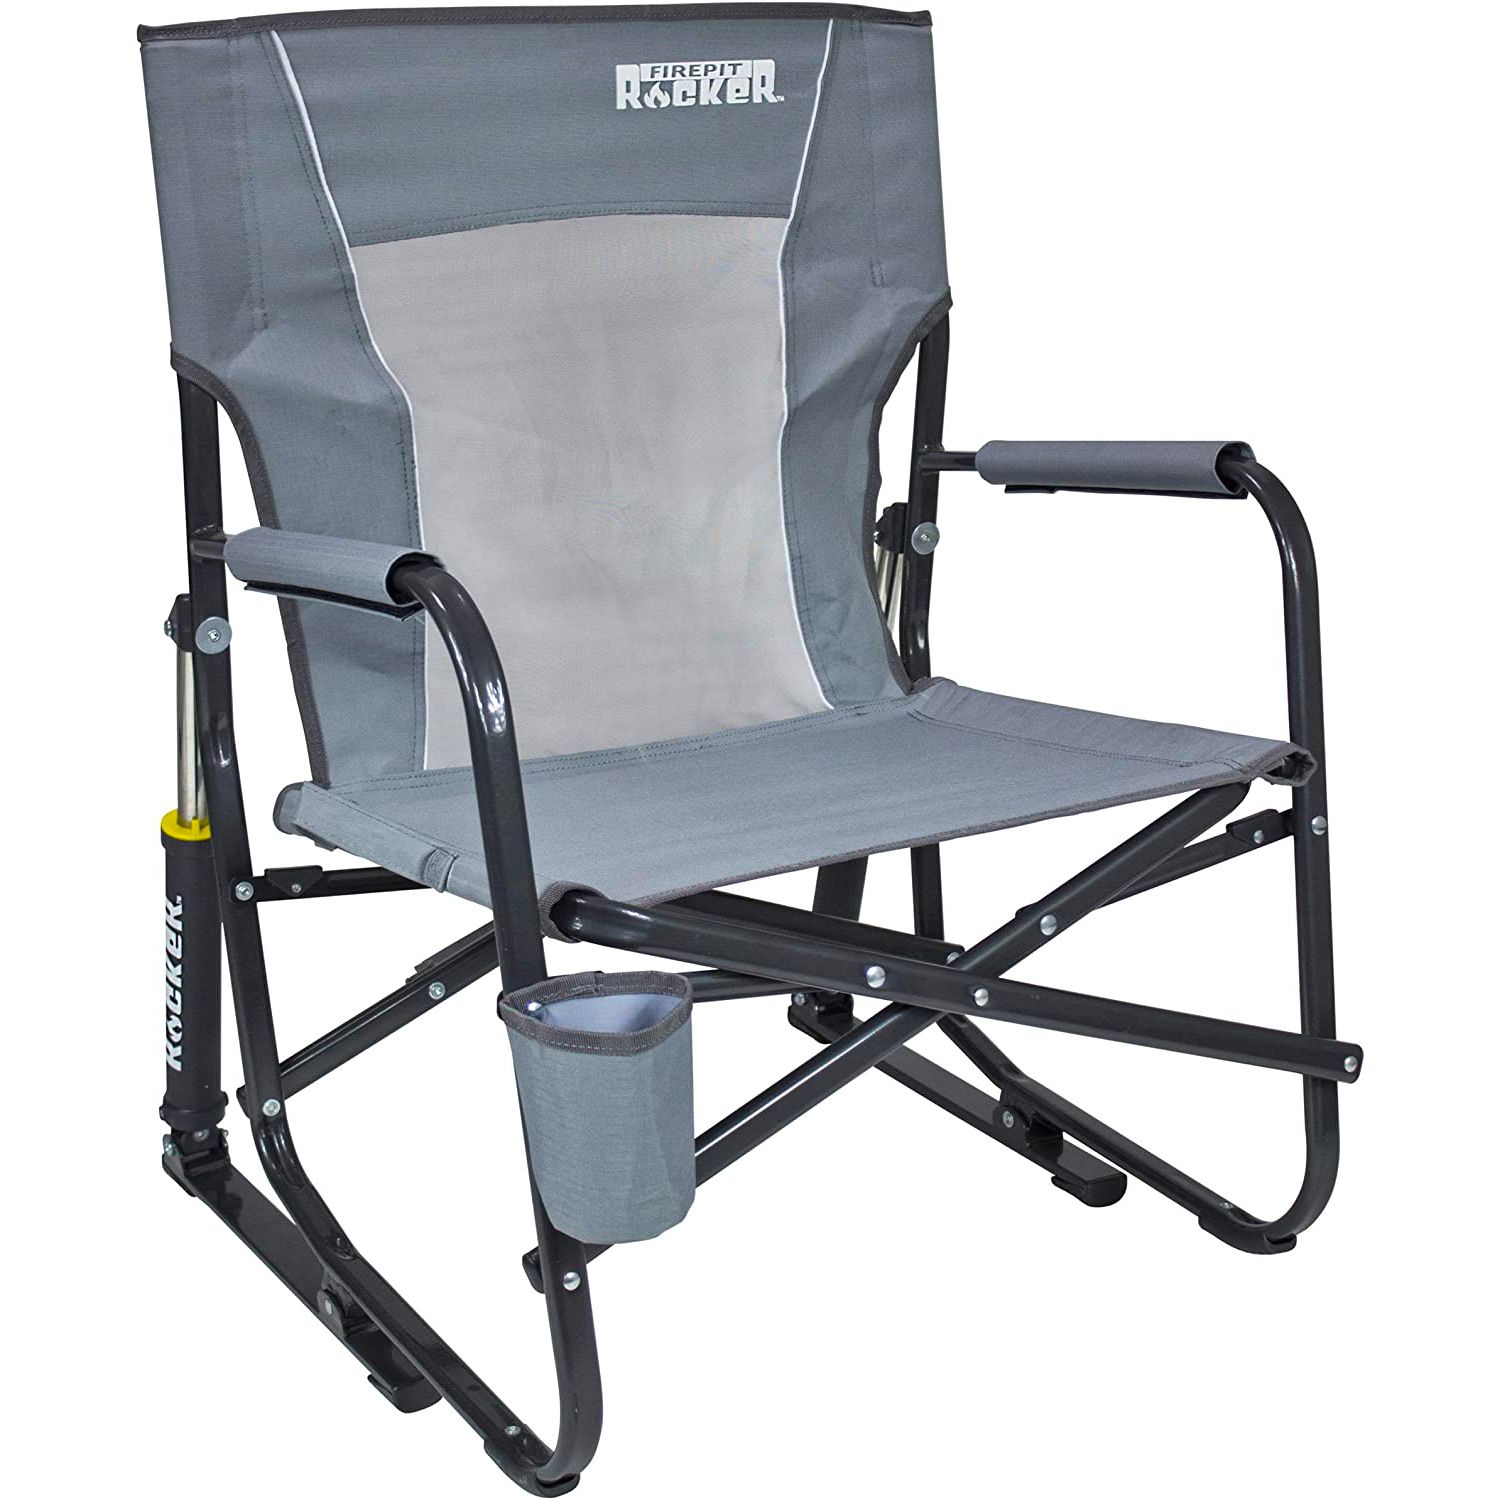 The Best Fire Pit Chairs Option: Portable Rocking Chair